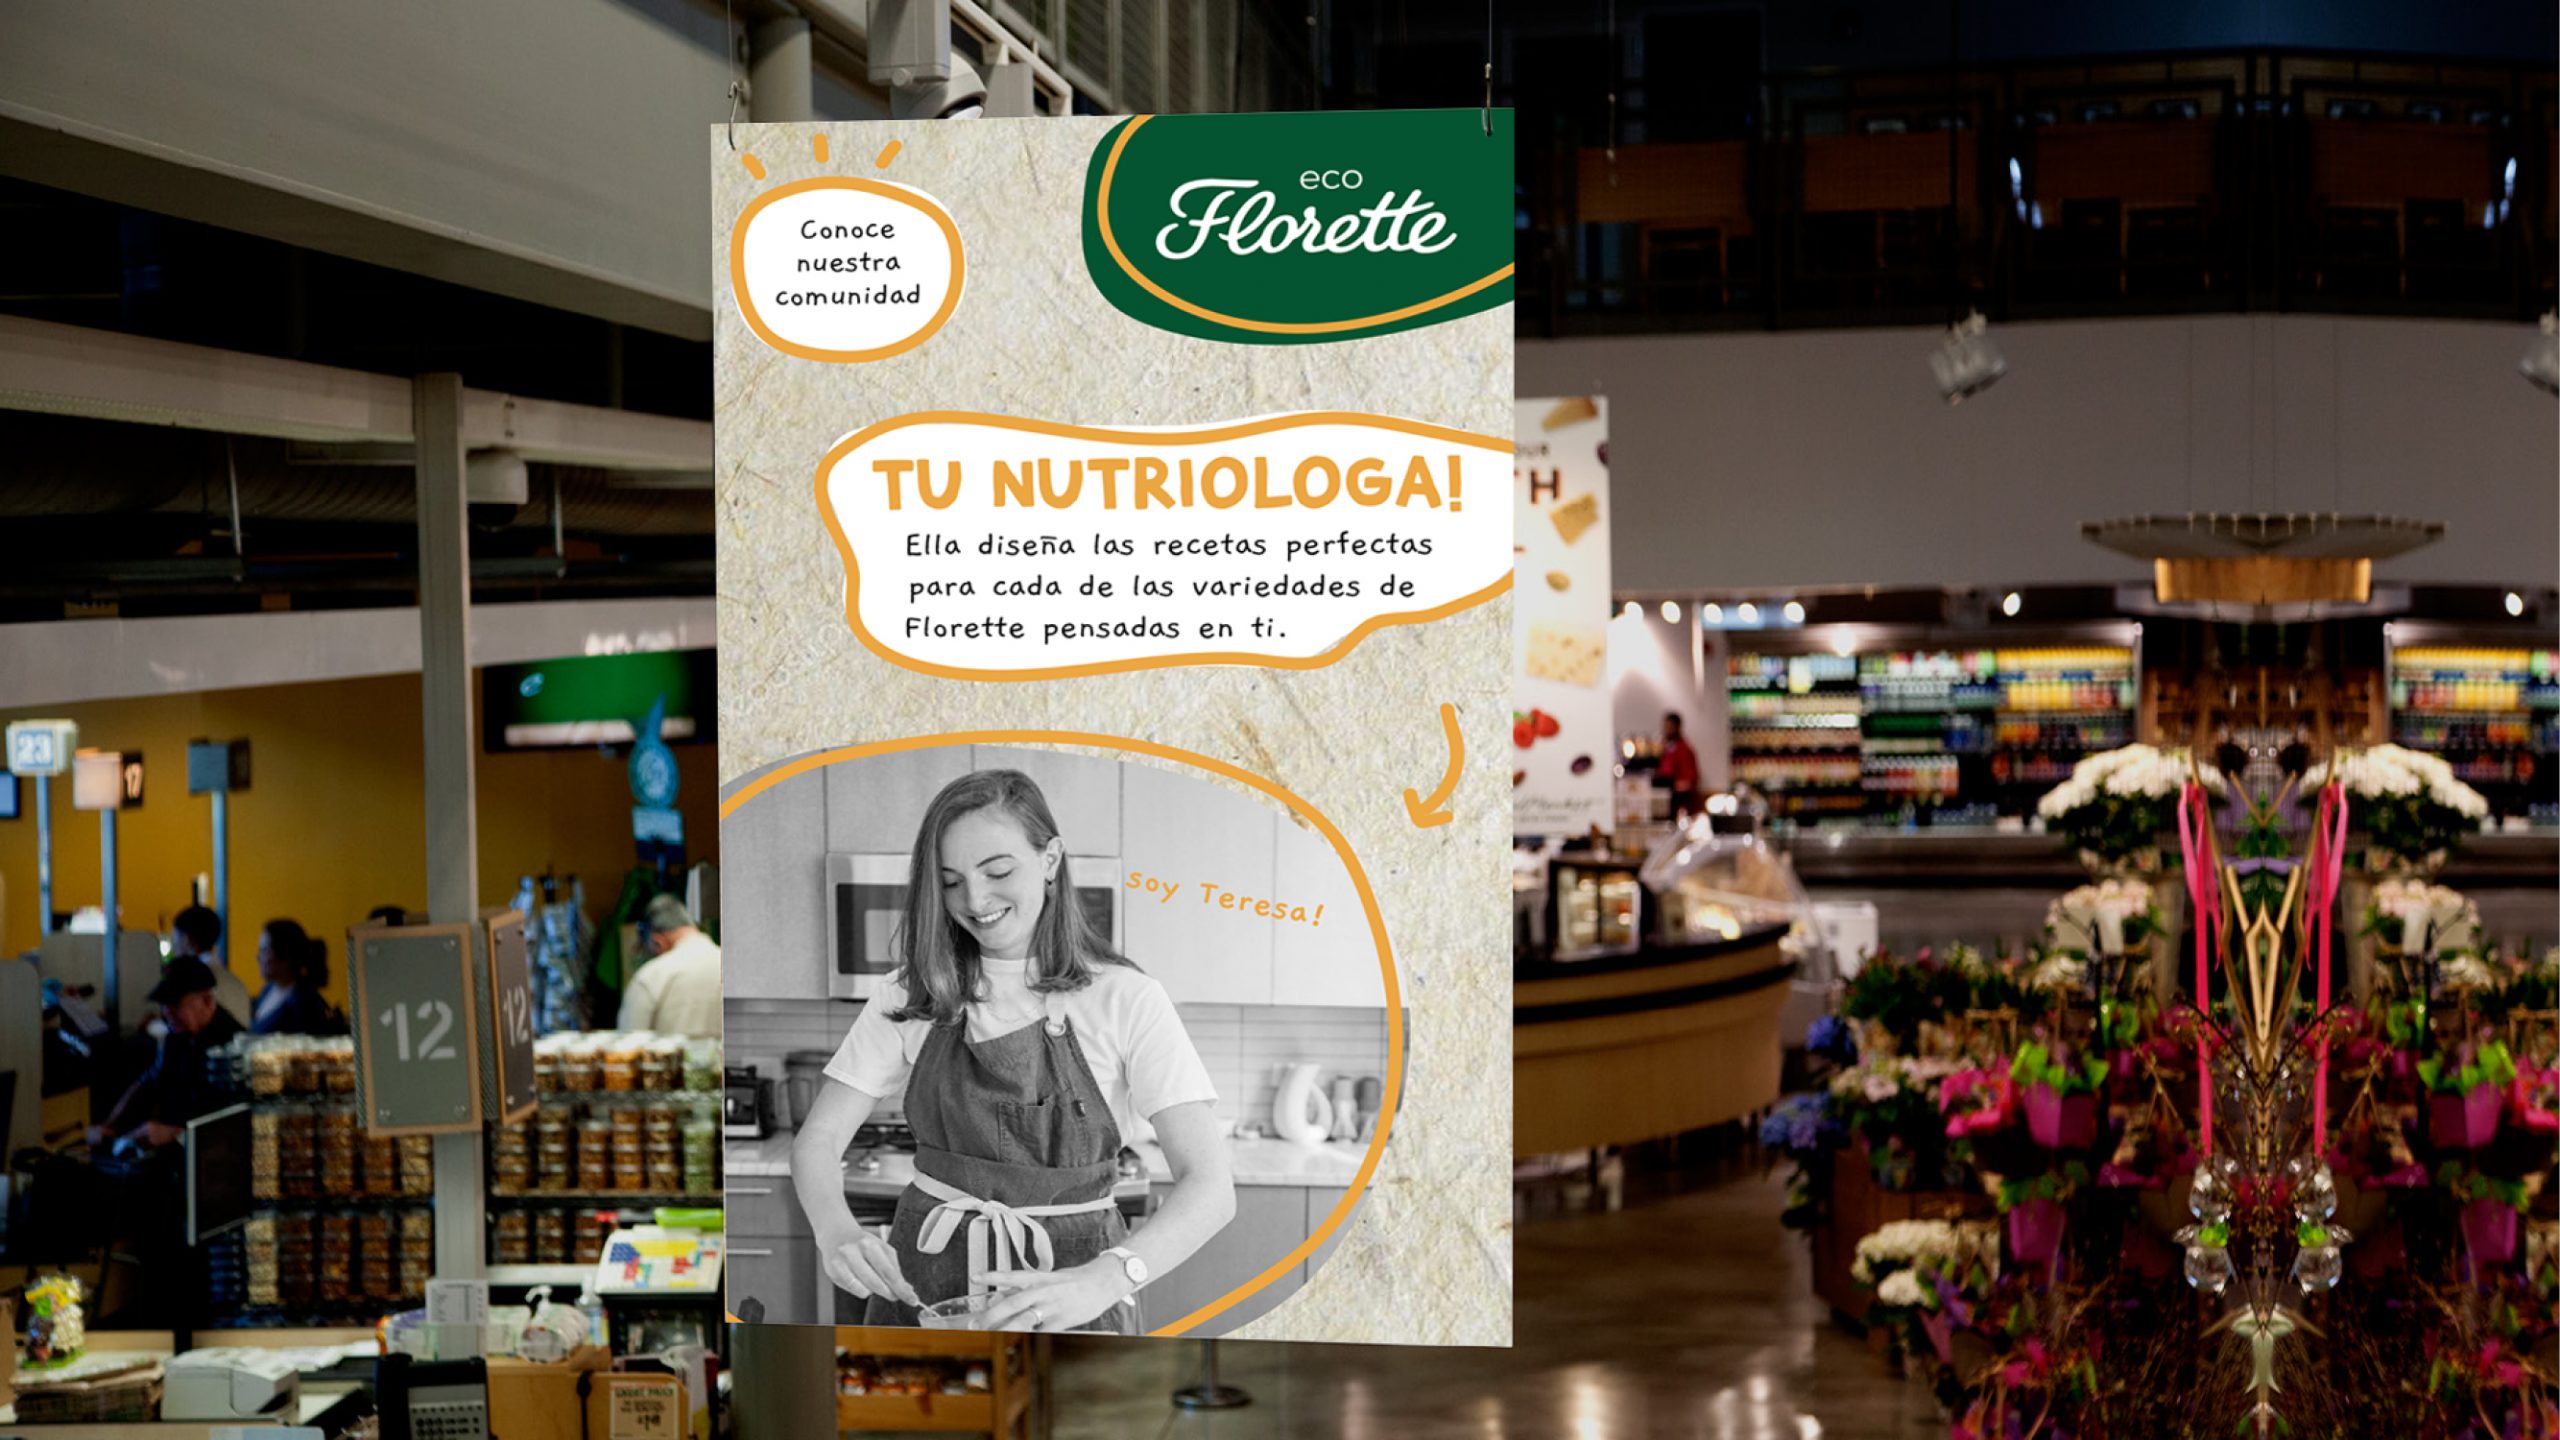 Poster for Florette Eco, in a supermarket with a picture of a nutritionist creating the recipes for the ready-to-eat meals